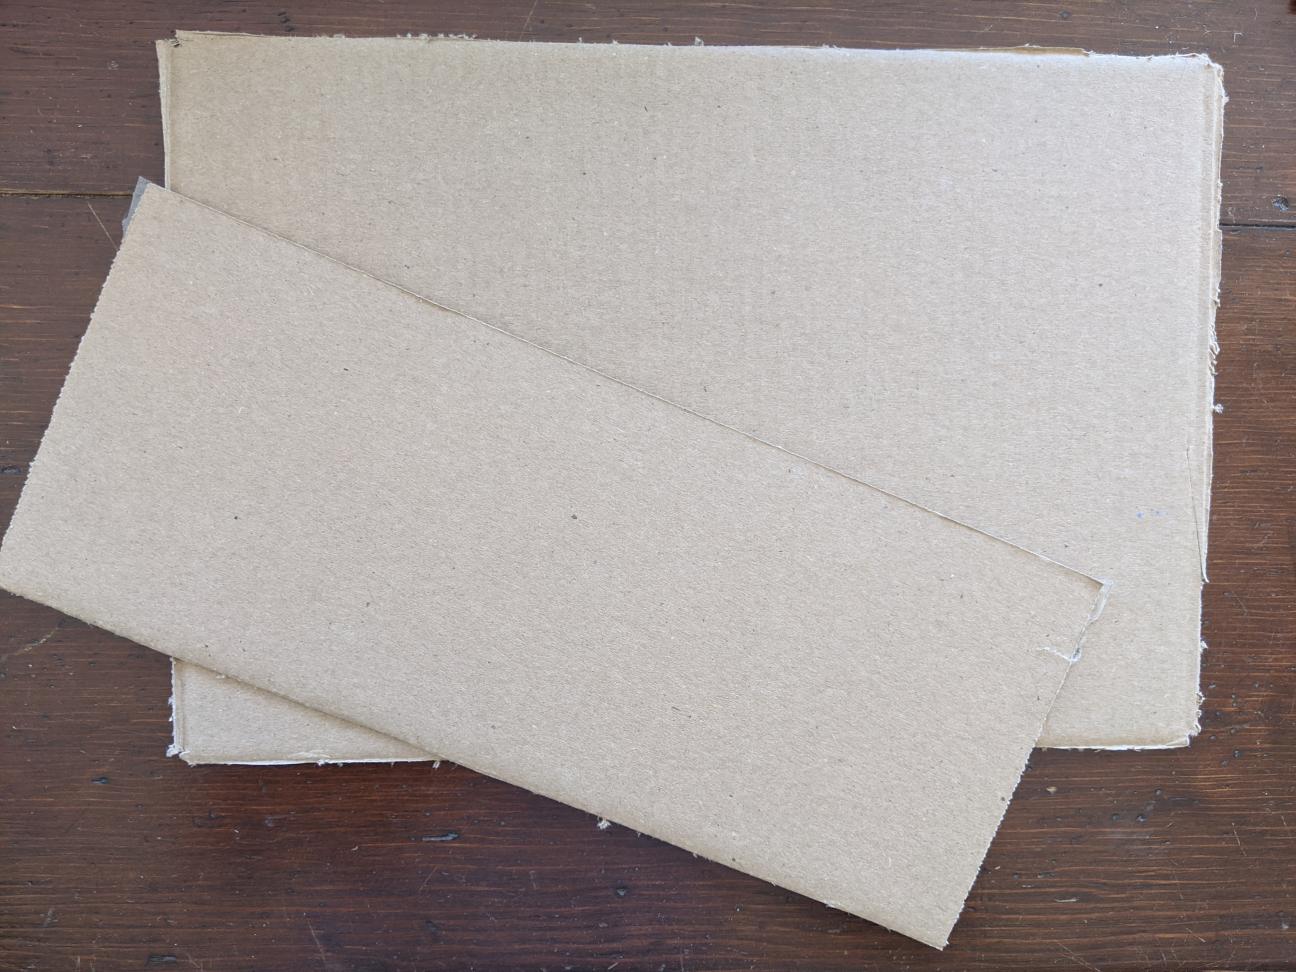 Two rectangular pieces of cardboard, one of which is thinner than the other.